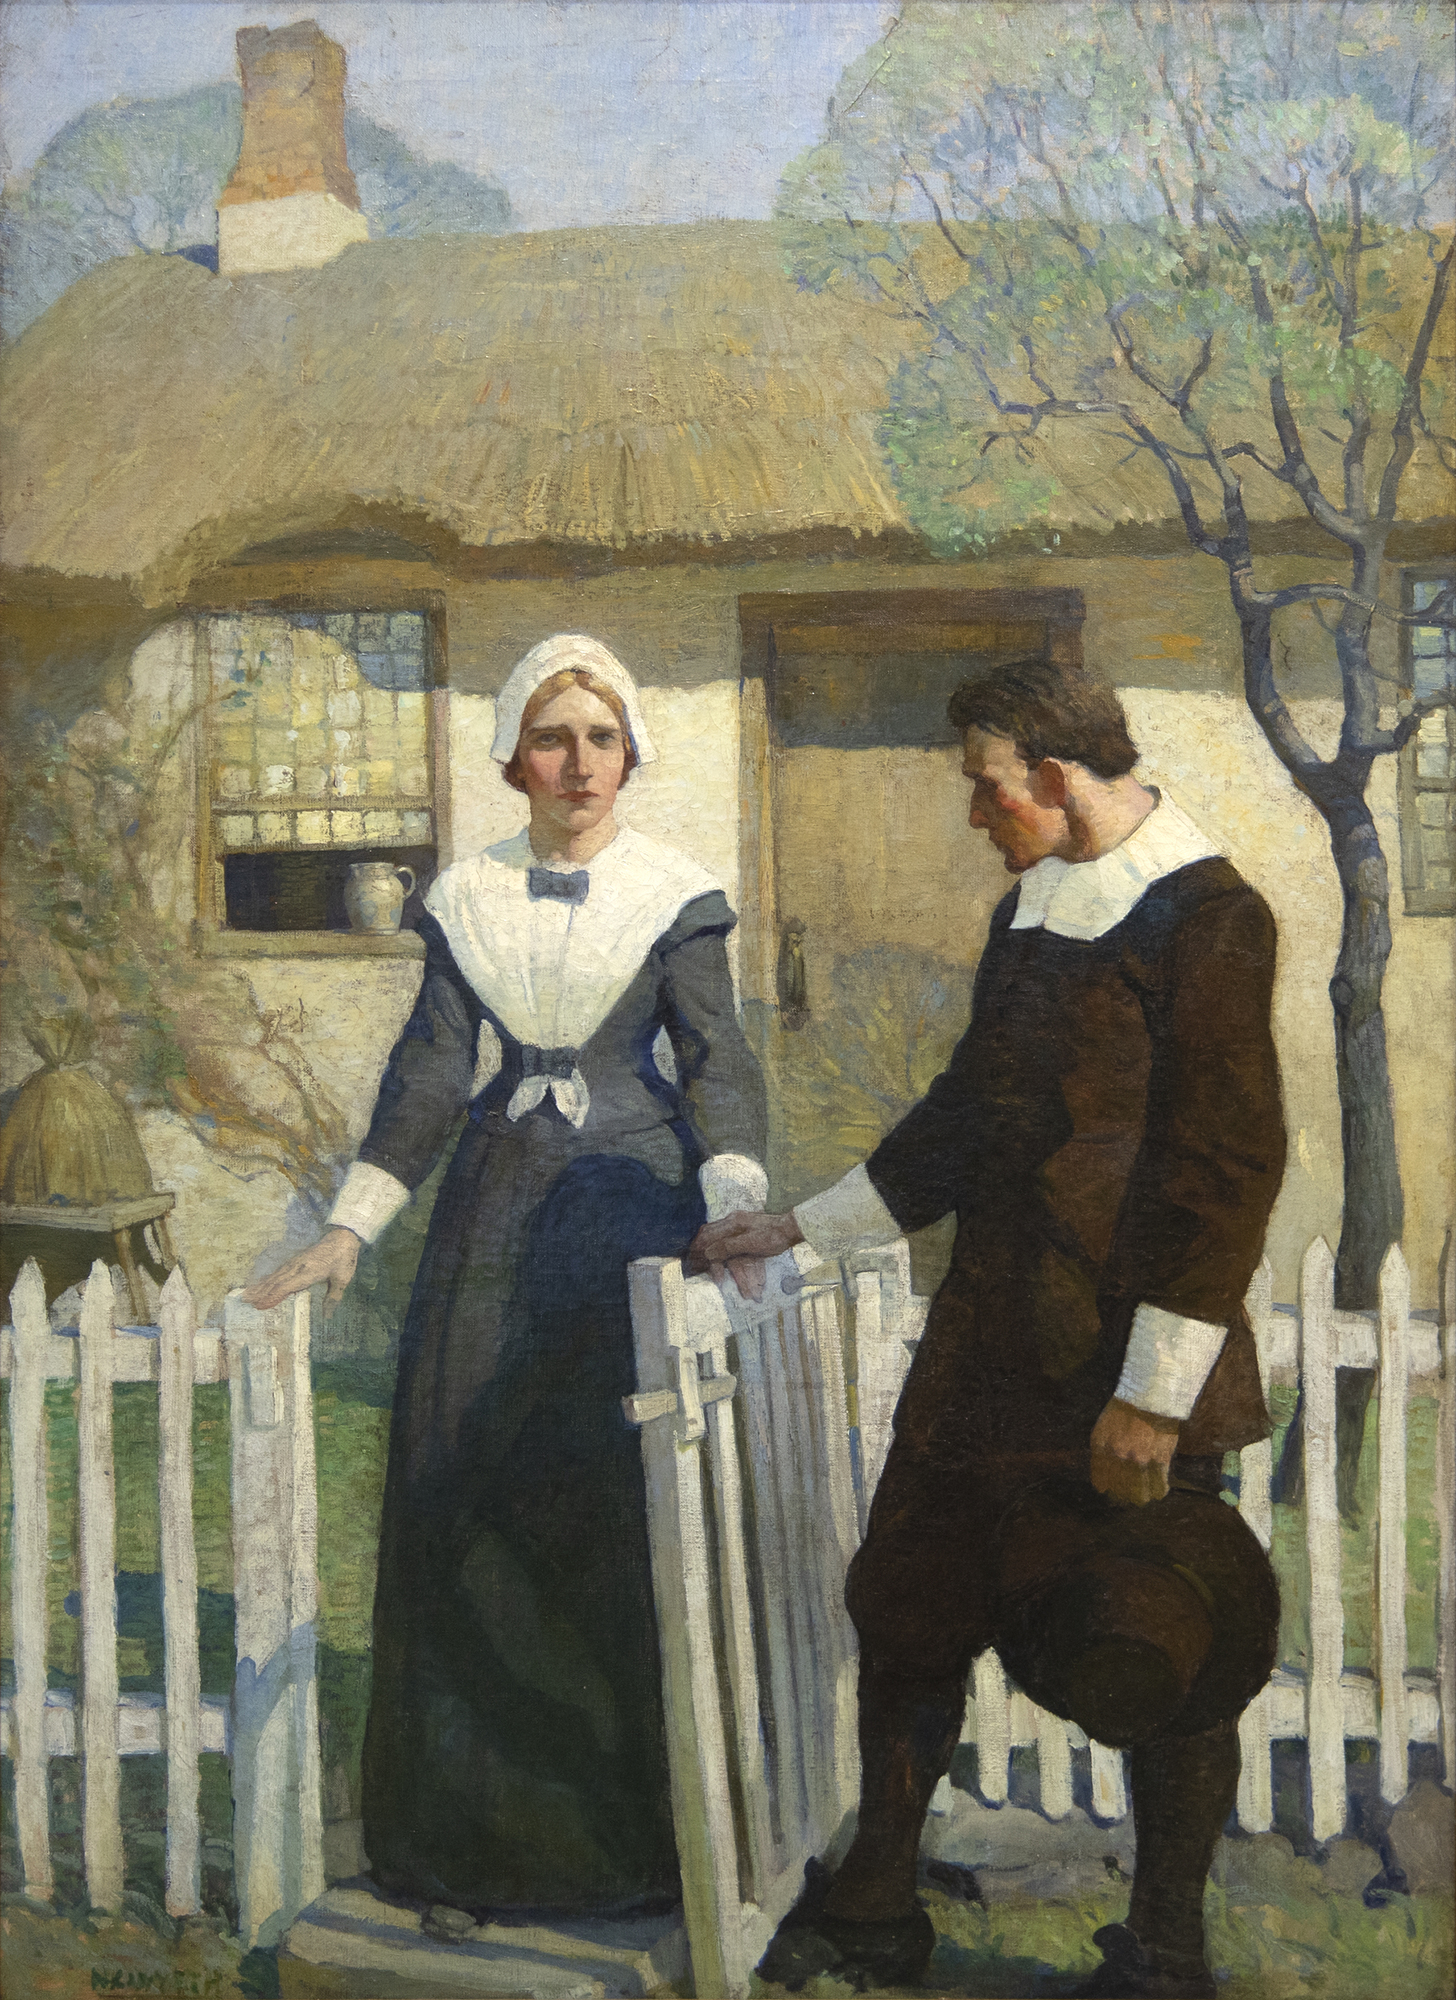 Initially used as a frontispiece illustration for the 1914 novel, “The Witch,” by Mary Johnston, Wyeth’s painting presents a poignant scene of friendship and understanding between a grieving, independent woman and a generous, misunderstood doctor. Although the two hardly know each other, they have a shared understanding of and reverence for what is good. While the rest of the town searches for the devil in all things, these two choose kindness and light. Here, they take a moment to appreciate the lives they have led and the good they have done. Wyeth’s illustration depicts hope and expectation of good despite the perils and sorrows of human life.<br><br>In addition to illustrating more than 100 books, including adventure classics like Treasure Island, Kidnapped, Robinson Crusoe, and The Last of the Mohicans, Wyeth was also a highly regarded muralist, receiving numerous commissions for prestigious corporate and government buildings throughout the United States. Wyeth’s style, honed by early work at the Saturday Evening Post and Scribner’s, demonstrates his keen awareness of the revealing gesture, allowing readers to instantly grasp the essence of a scene.